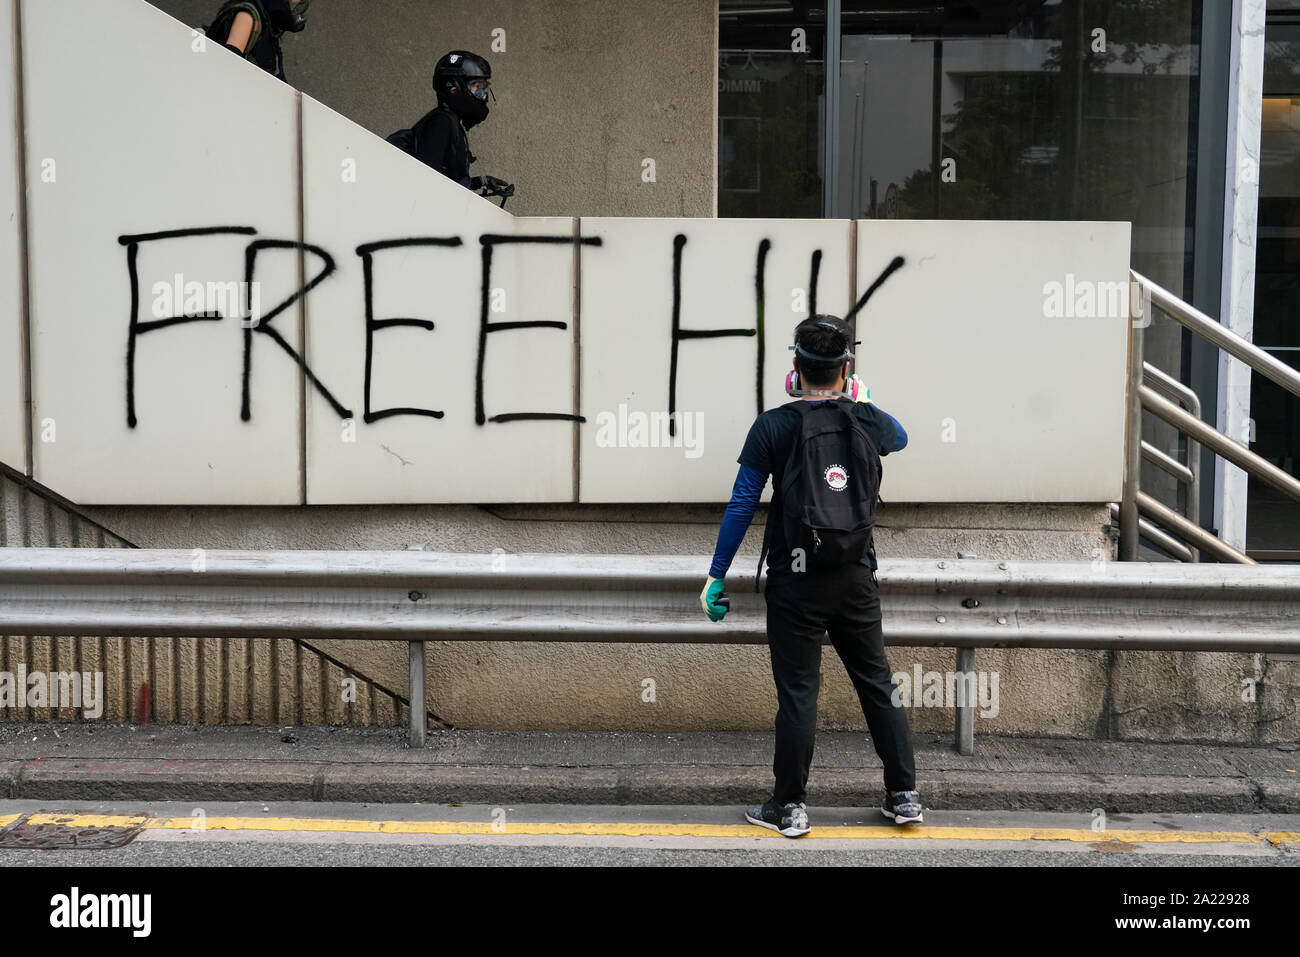 Hong Kong. 29 September, 2019. Illegal march by thousands of pro-democracy supporters from Causeway Bay to Government offices at Admiralty. Police unsuccessfully tried to stop march at start with teargas fired and scuffles. March marked the 5th anniversary of the start of the Umbrella Movement. Graffiti sprayed on wall. Stock Photo